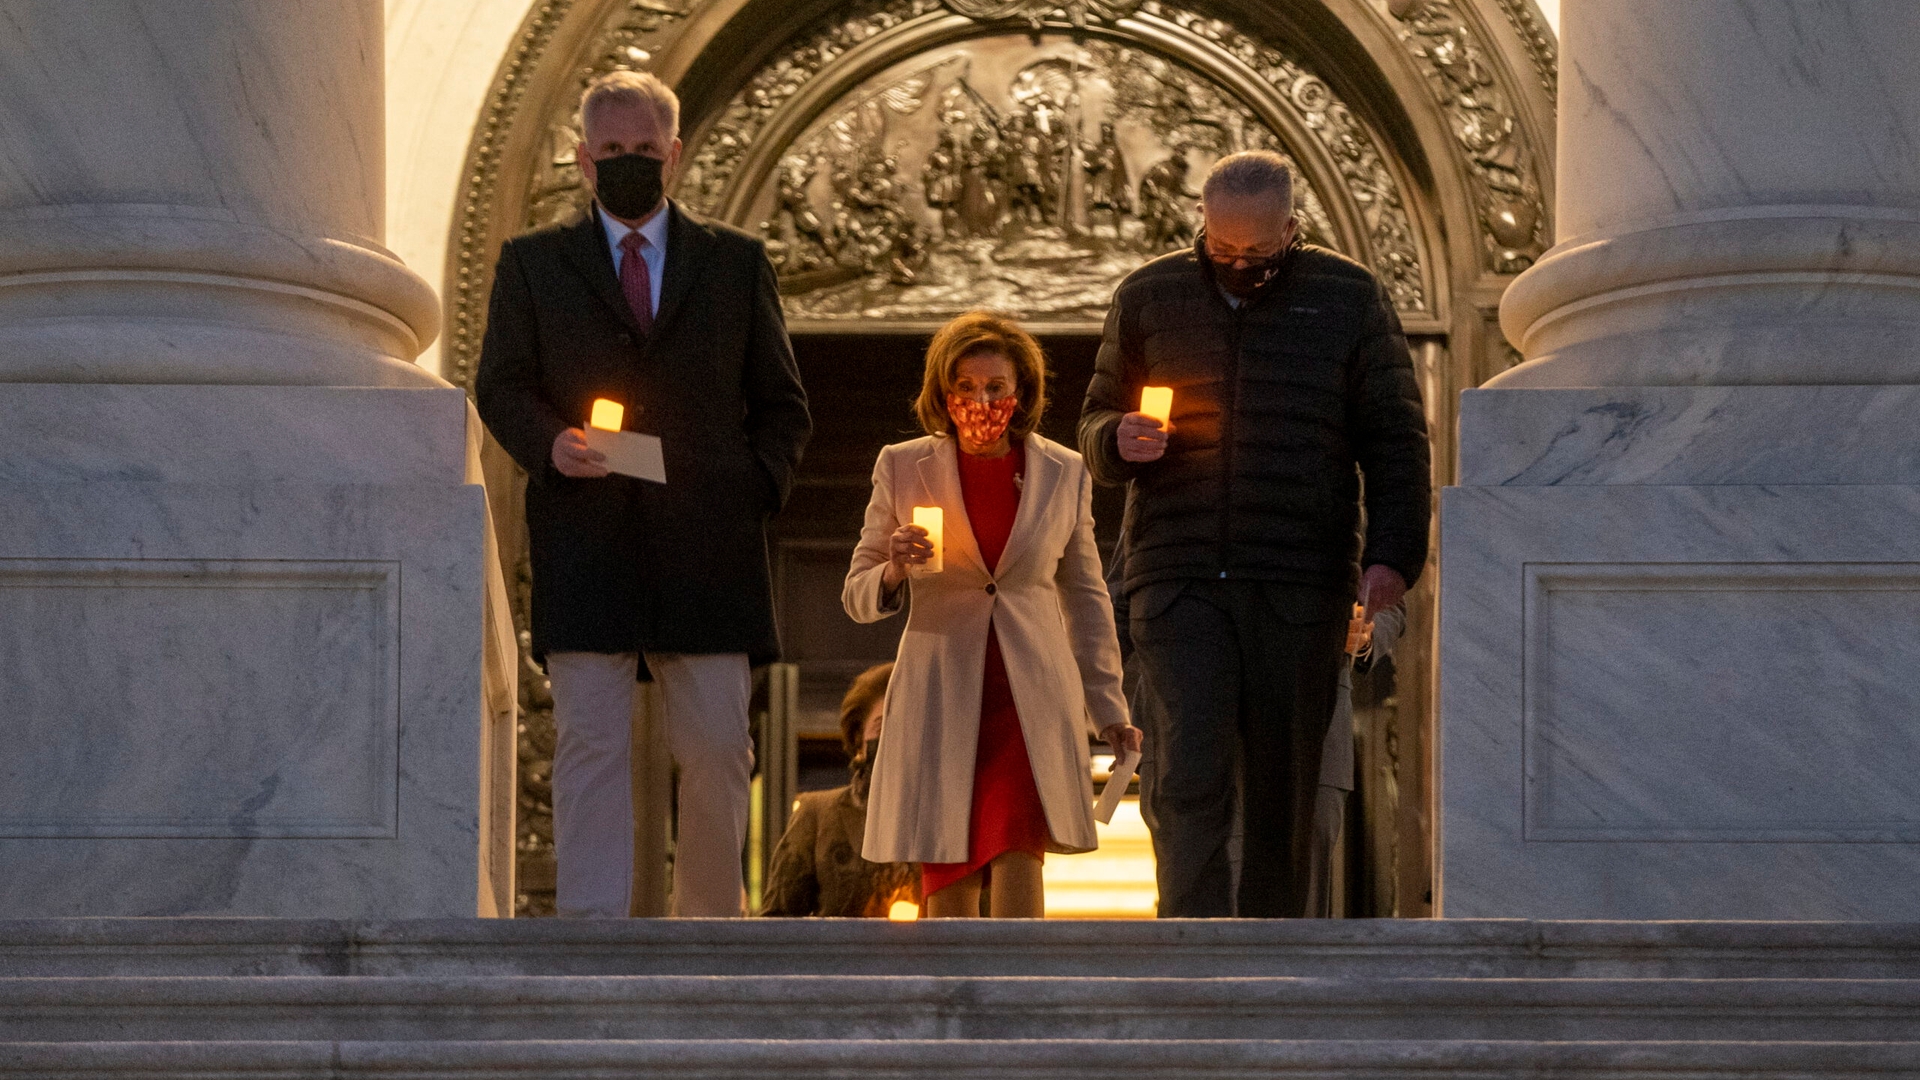 Speaker Pelosi, Congressional Leaders, and bipartisan members of House and Senate hold U.S. Capitol Moment of Silence for 800,000 American Lives Lost to COVID-19.